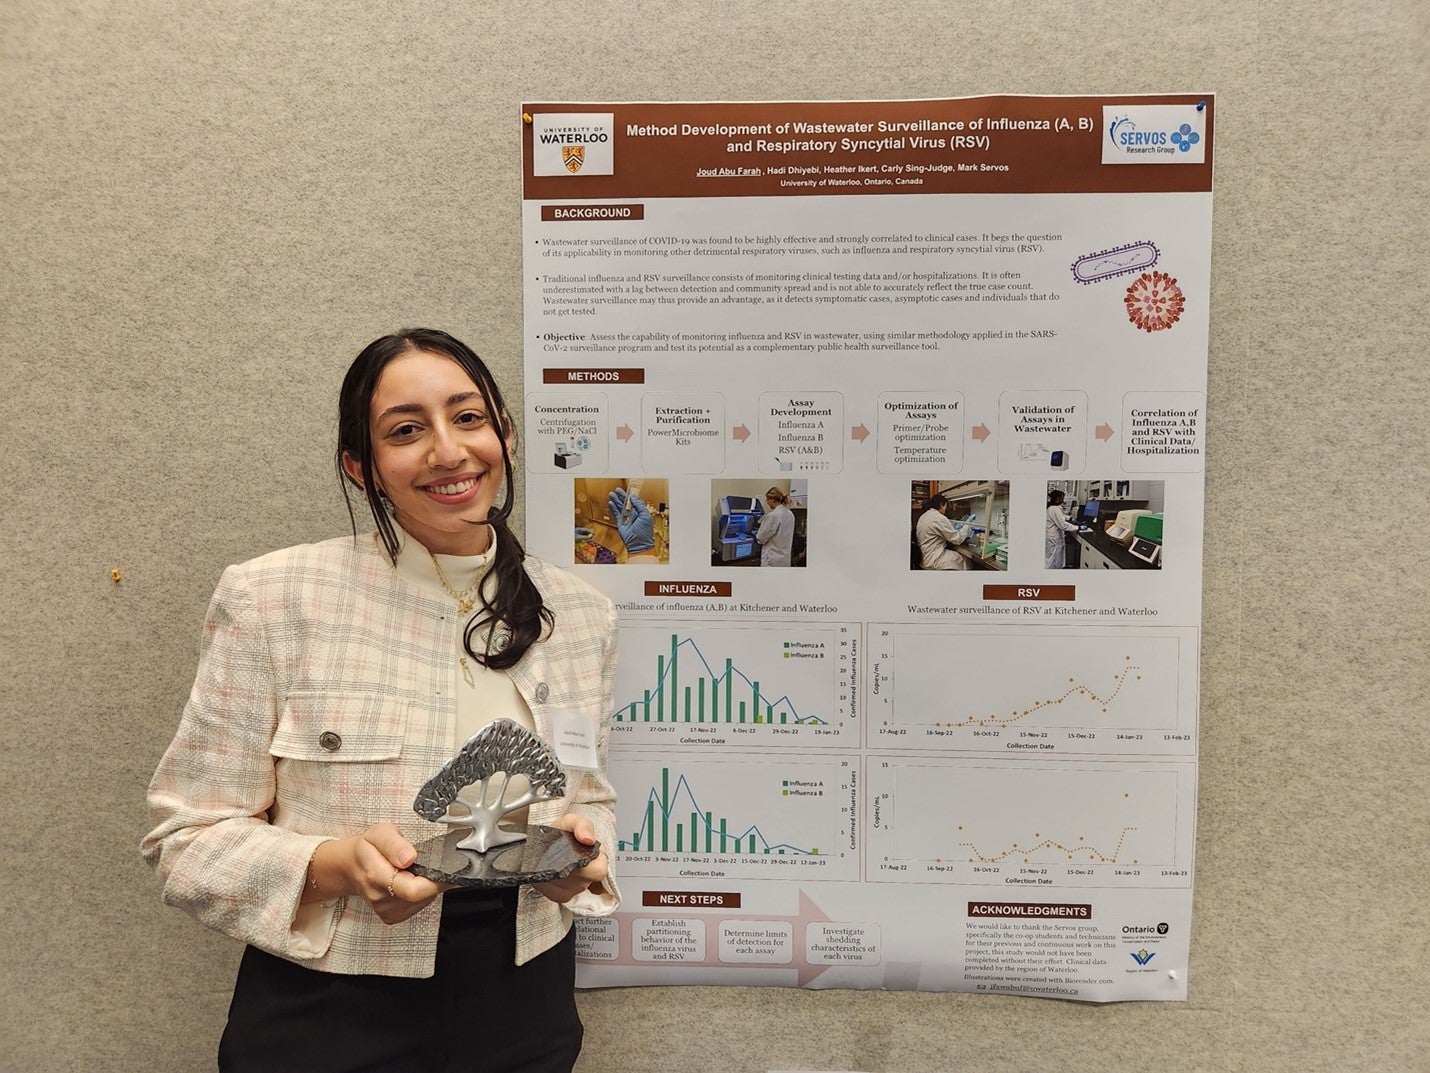 Joud Abu Farah posting with best poster award at Toronto's Wastewater Surveillance Conference